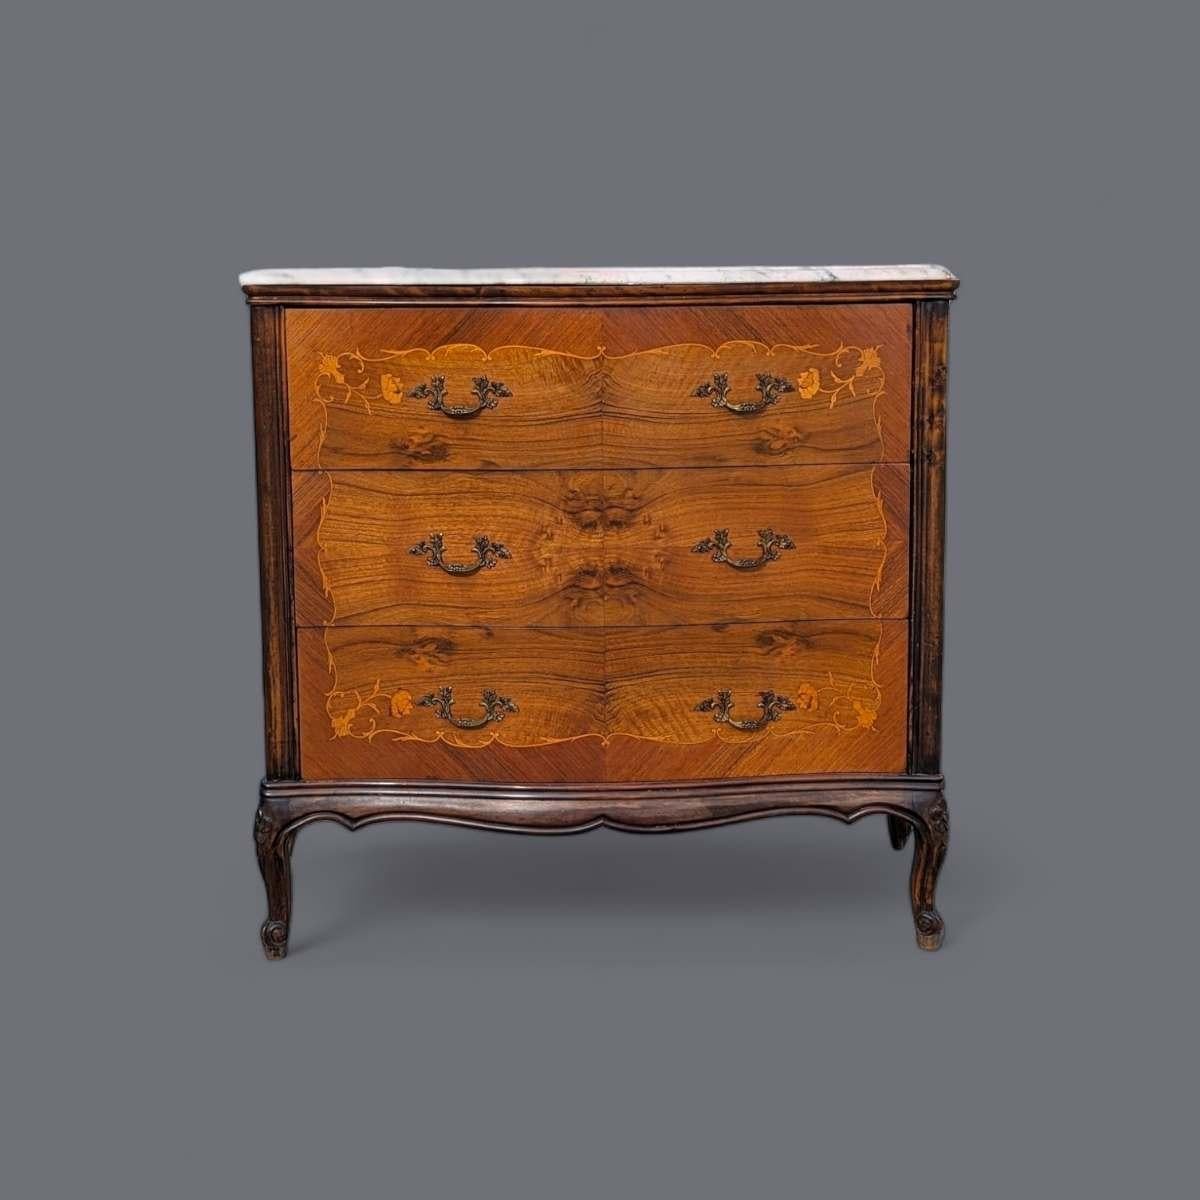 Presenting an exquisite antique French Louis XV style walnut buffet, crafted during the late 19th or early 20th century revival period. This stunning piece showcases the enduring elegance and opulence of the Rococo style, with its graceful curves,